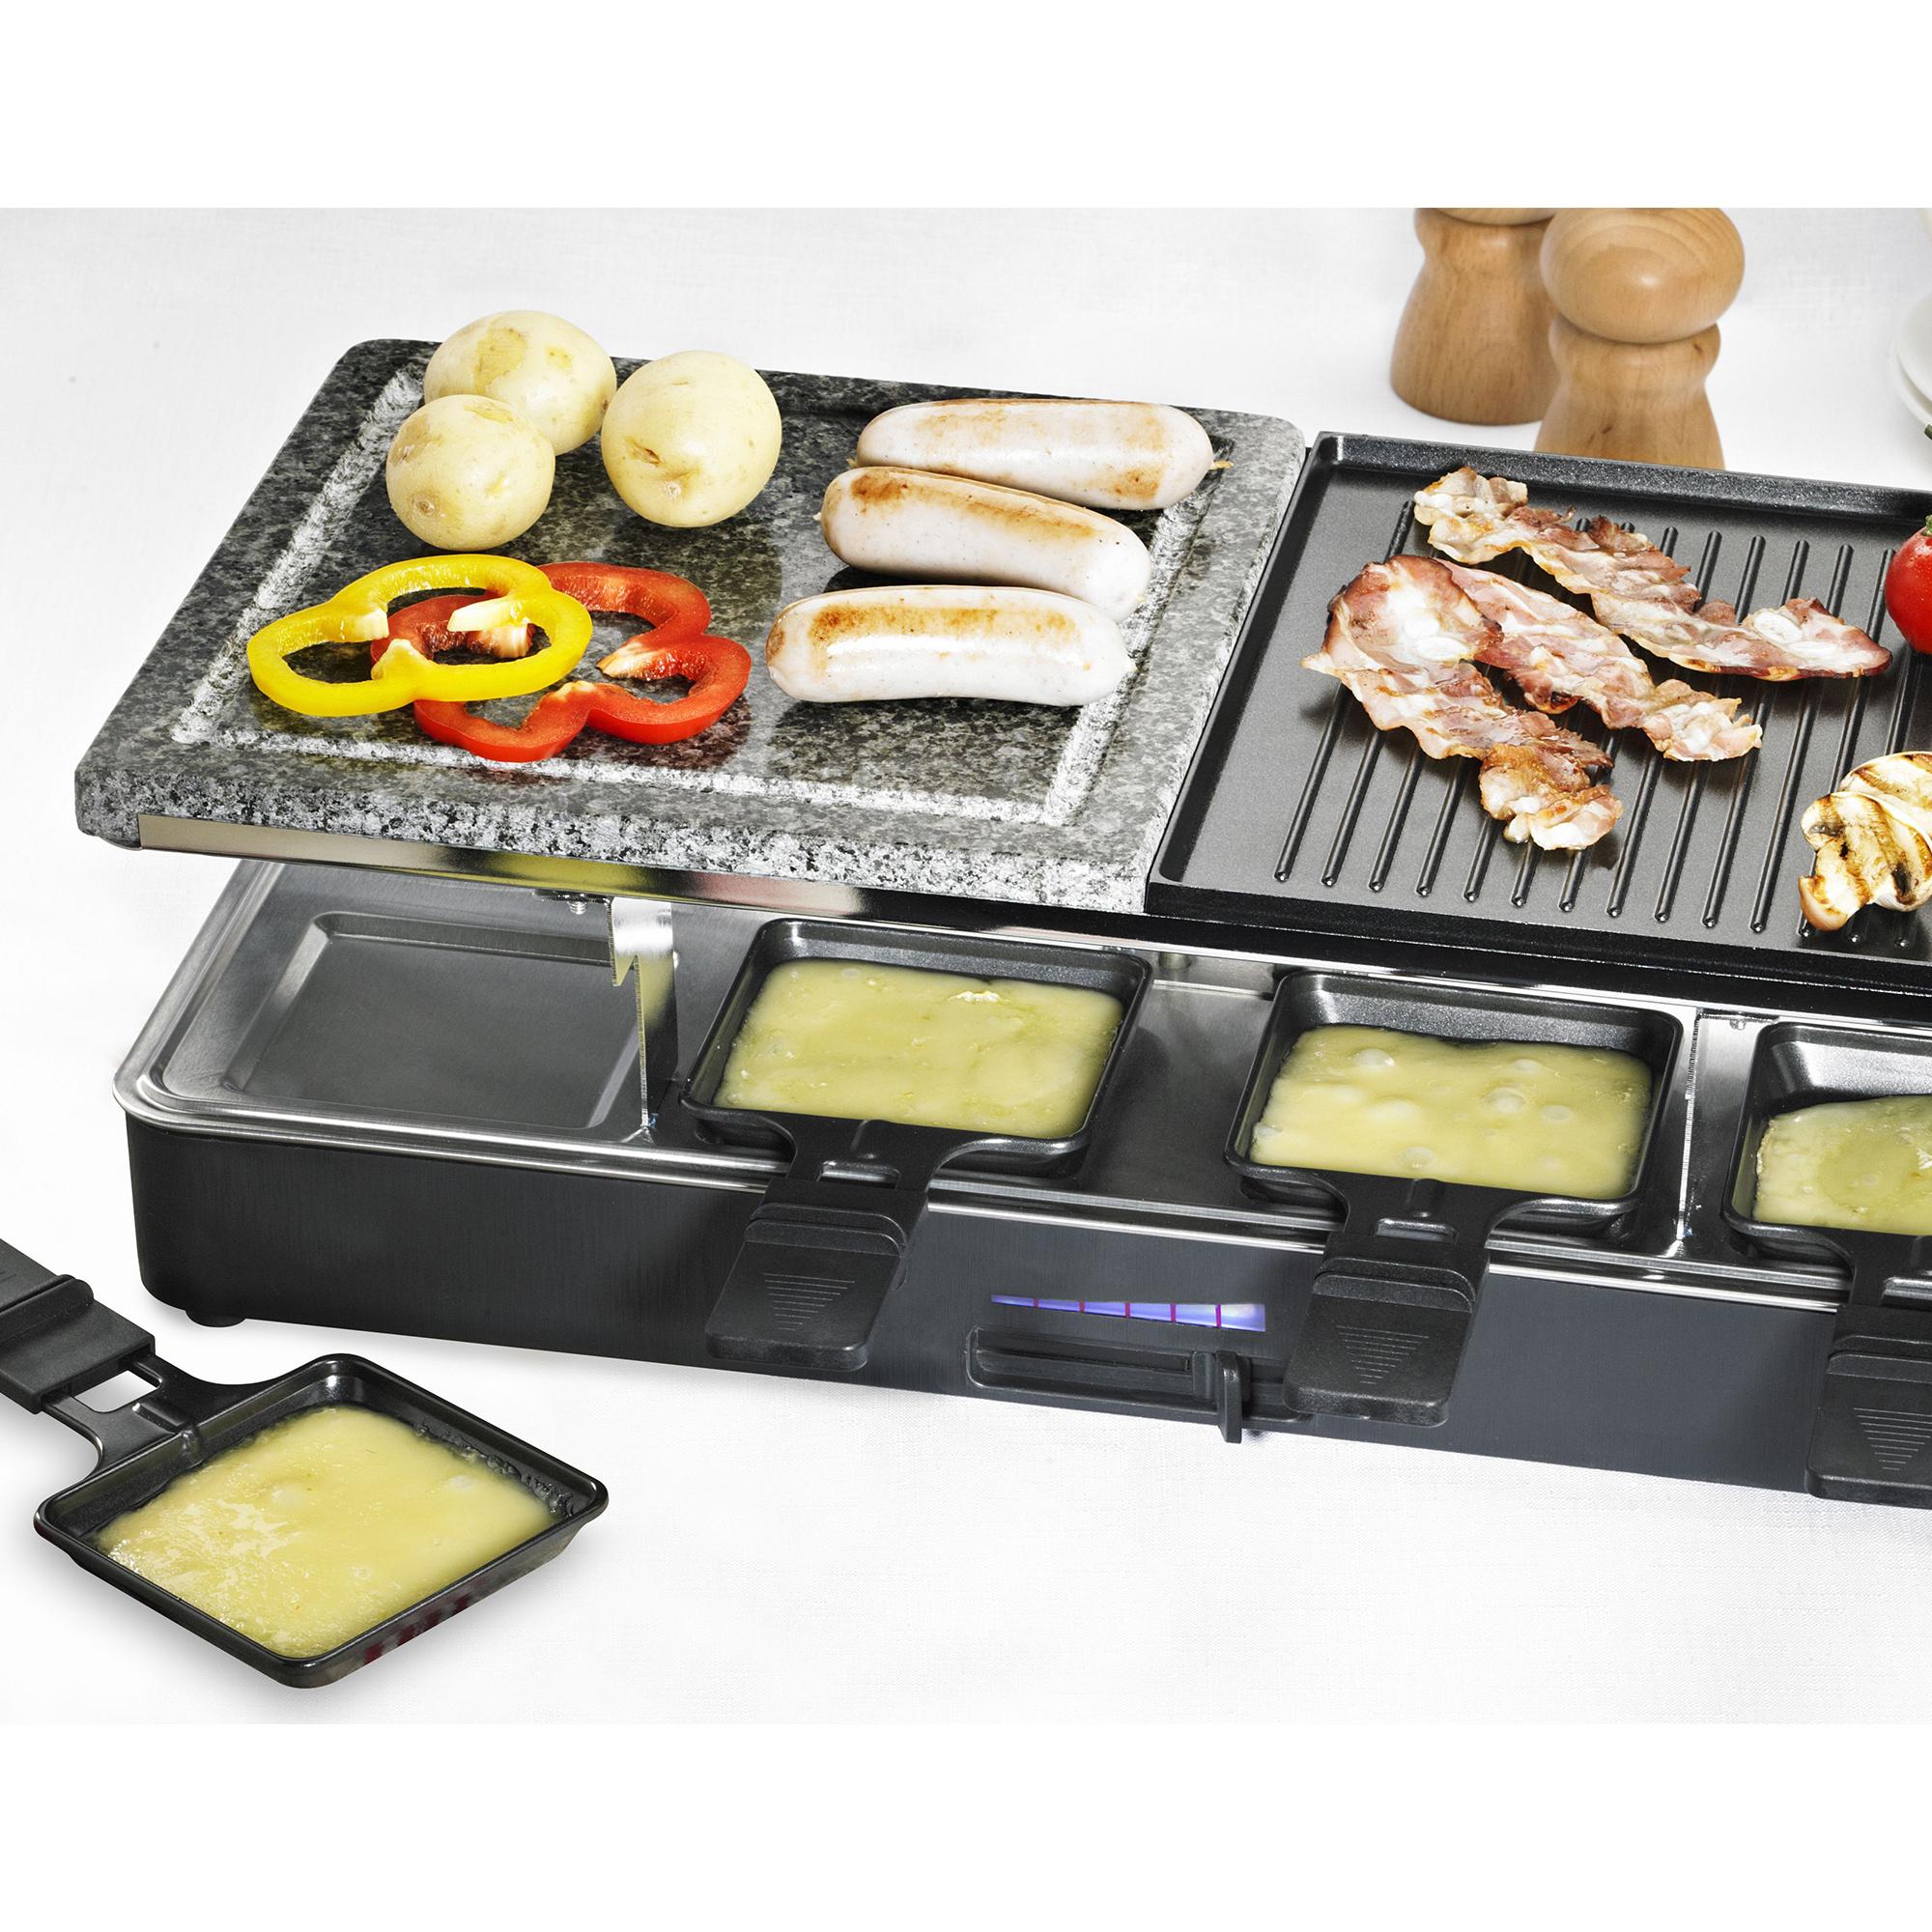 Davis & Waddell 8 Person Electric Party Grill and Raclette Black Image 6